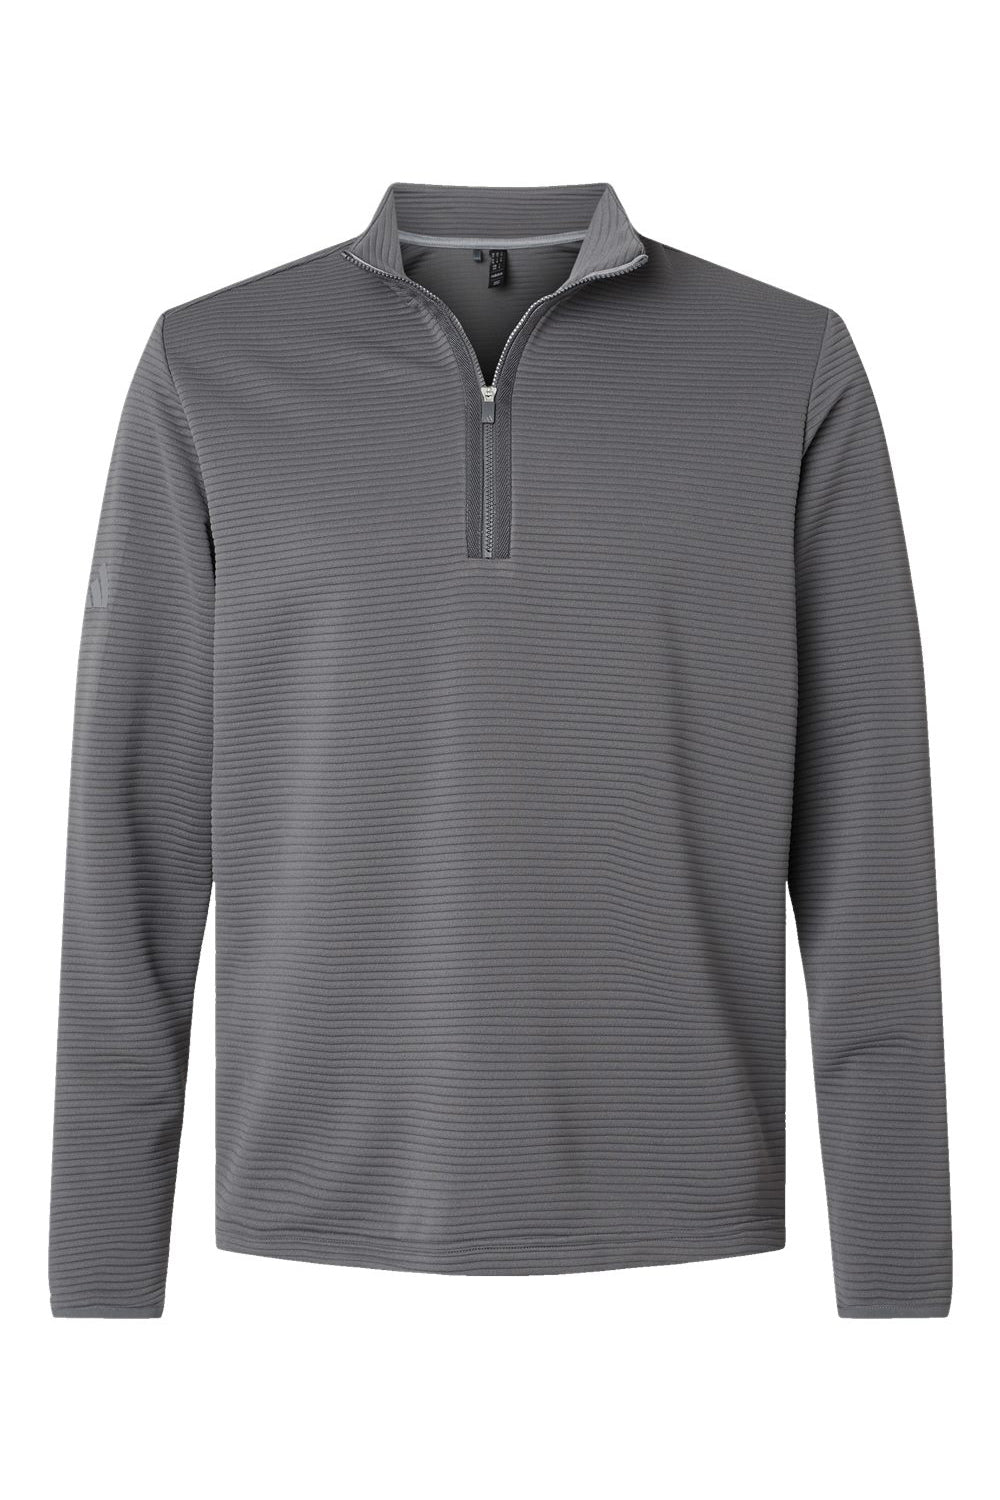 Adidas A588 Mens Spacer 1/4 Zip Pullover Grey Flat Front